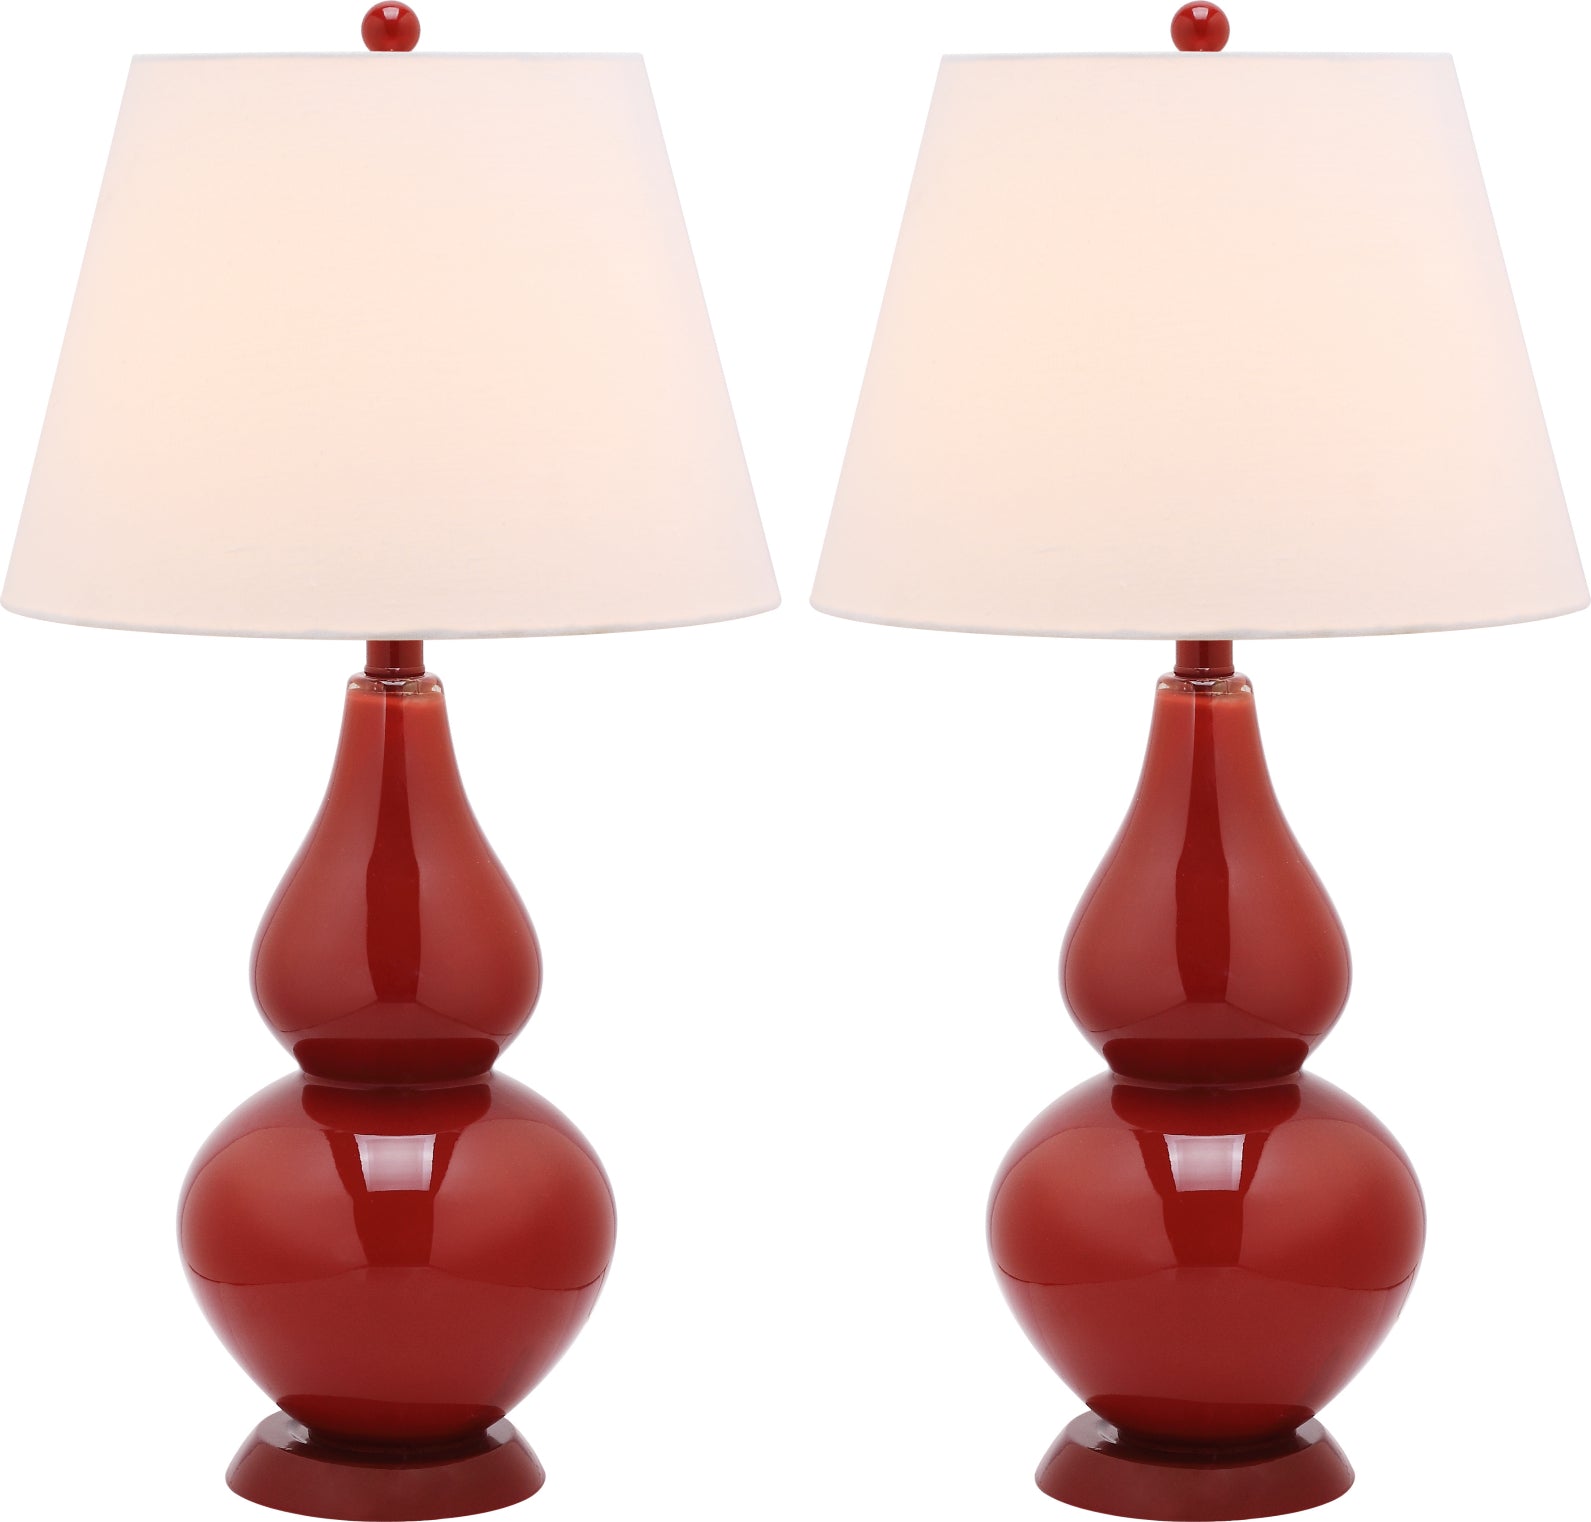 Safavieh Cybil 26-Inch H Double Gourd Lamp Red main image